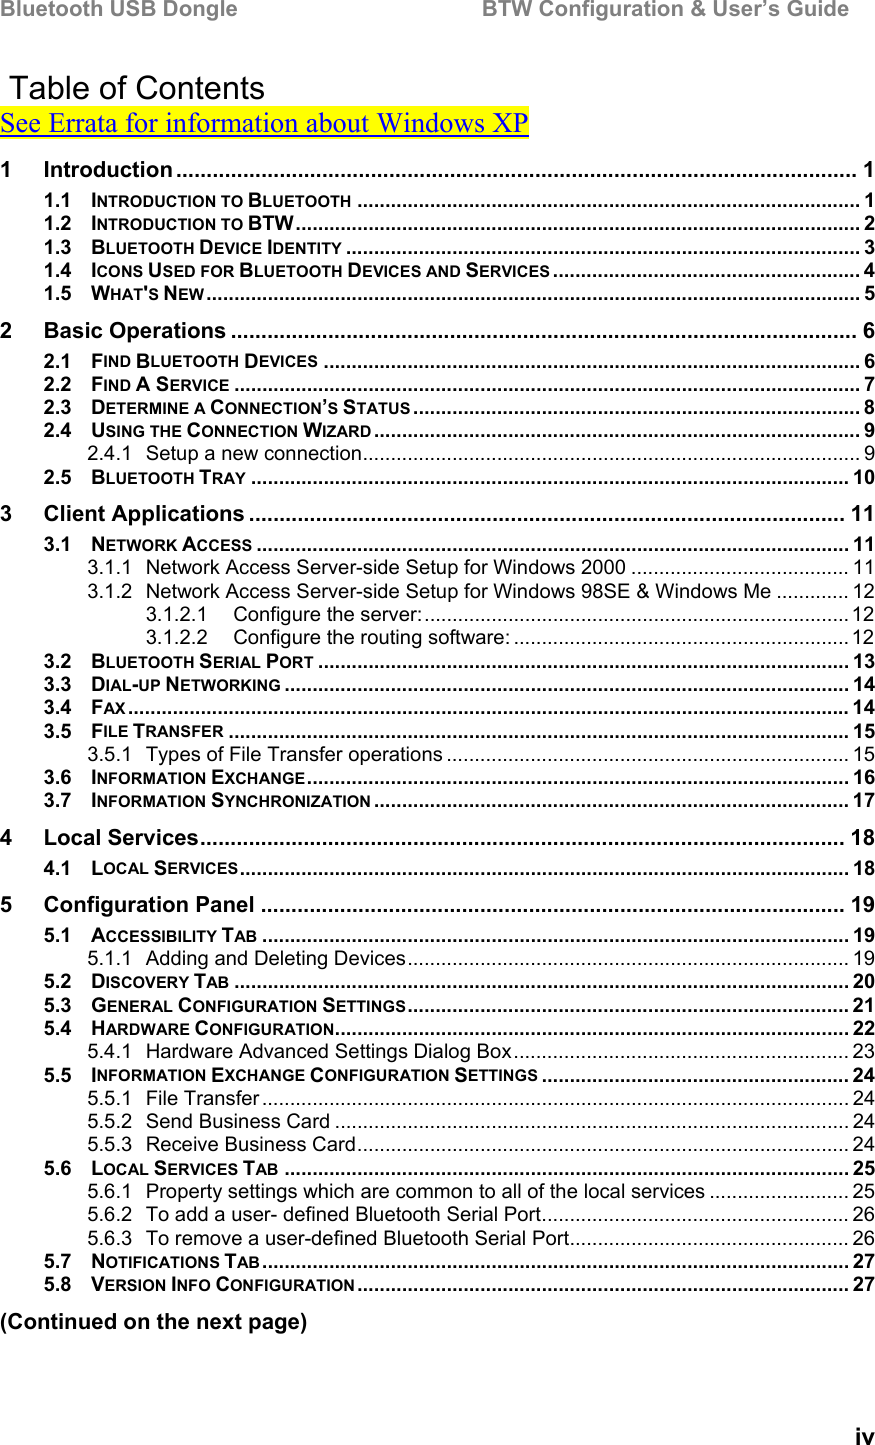 Bluetooth USB Dongle                                        BTW Configuration &amp; User’s Guide   iv  Table of Contents See Errata for information about Windows XP 1 Introduction ................................................................................................................ 1 1.1 INTRODUCTION TO BLUETOOTH .......................................................................................... 1 1.2 INTRODUCTION TO BTW..................................................................................................... 2 1.3 BLUETOOTH DEVICE IDENTITY ............................................................................................ 3 1.4 ICONS USED FOR BLUETOOTH DEVICES AND SERVICES ....................................................... 4 1.5 WHAT&apos;S NEW..................................................................................................................... 5 2 Basic Operations ....................................................................................................... 6 2.1 FIND BLUETOOTH DEVICES ................................................................................................ 6 2.2 FIND A SERVICE ................................................................................................................ 7 2.3 DETERMINE A CONNECTION’S STATUS ................................................................................ 8 2.4 USING THE CONNECTION WIZARD ....................................................................................... 9 2.4.1 Setup a new connection......................................................................................... 9 2.5 BLUETOOTH TRAY ........................................................................................................... 10 3 Client Applications .................................................................................................. 11 3.1 NETWORK ACCESS .......................................................................................................... 11 3.1.1 Network Access Server-side Setup for Windows 2000 ....................................... 11 3.1.2 Network Access Server-side Setup for Windows 98SE &amp; Windows Me ............. 12 3.1.2.1 Configure the server:............................................................................12 3.1.2.2 Configure the routing software: ............................................................12 3.2 BLUETOOTH SERIAL PORT ............................................................................................... 13 3.3 DIAL-UP NETWORKING ..................................................................................................... 14 3.4 FAX ................................................................................................................................. 14 3.5 FILE TRANSFER ............................................................................................................... 15 3.5.1 Types of File Transfer operations ........................................................................ 15 3.6 INFORMATION EXCHANGE................................................................................................. 16 3.7 INFORMATION SYNCHRONIZATION ..................................................................................... 17 4 Local Services.......................................................................................................... 18 4.1 LOCAL SERVICES............................................................................................................. 18 5 Configuration Panel ................................................................................................ 19 5.1 ACCESSIBILITY TAB ......................................................................................................... 19 5.1.1 Adding and Deleting Devices............................................................................... 19 5.2 DISCOVERY TAB .............................................................................................................. 20 5.3 GENERAL CONFIGURATION SETTINGS............................................................................... 21 5.4 HARDWARE CONFIGURATION............................................................................................ 22 5.4.1 Hardware Advanced Settings Dialog Box............................................................ 23 5.5 INFORMATION EXCHANGE CONFIGURATION SETTINGS ....................................................... 24 5.5.1 File Transfer ......................................................................................................... 24 5.5.2 Send Business Card ............................................................................................ 24 5.5.3 Receive Business Card........................................................................................ 24 5.6 LOCAL SERVICES TAB ..................................................................................................... 25 5.6.1 Property settings which are common to all of the local services ......................... 25 5.6.2 To add a user- defined Bluetooth Serial Port....................................................... 26 5.6.3 To remove a user-defined Bluetooth Serial Port.................................................. 26 5.7 NOTIFICATIONS TAB ......................................................................................................... 27 5.8 VERSION INFO CONFIGURATION ........................................................................................ 27 (Continued on the next page) 